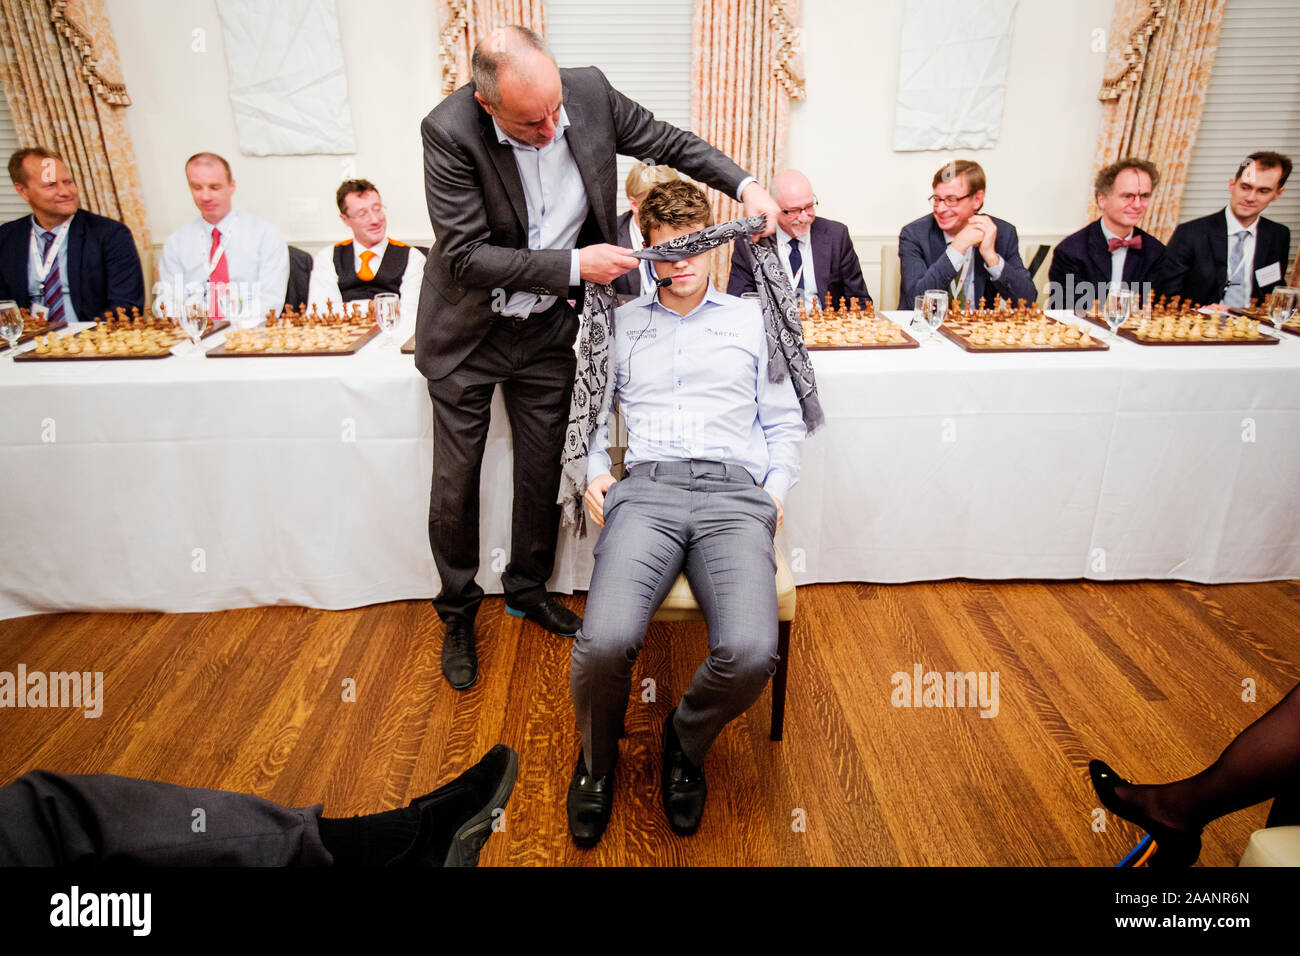 Magnus Carlsen, age 32, Norwegian chess grandmaster, dined peacefully in  his family's home today, surrounded by loved ones. Sources report it was  delicious. : r/AnarchyChess